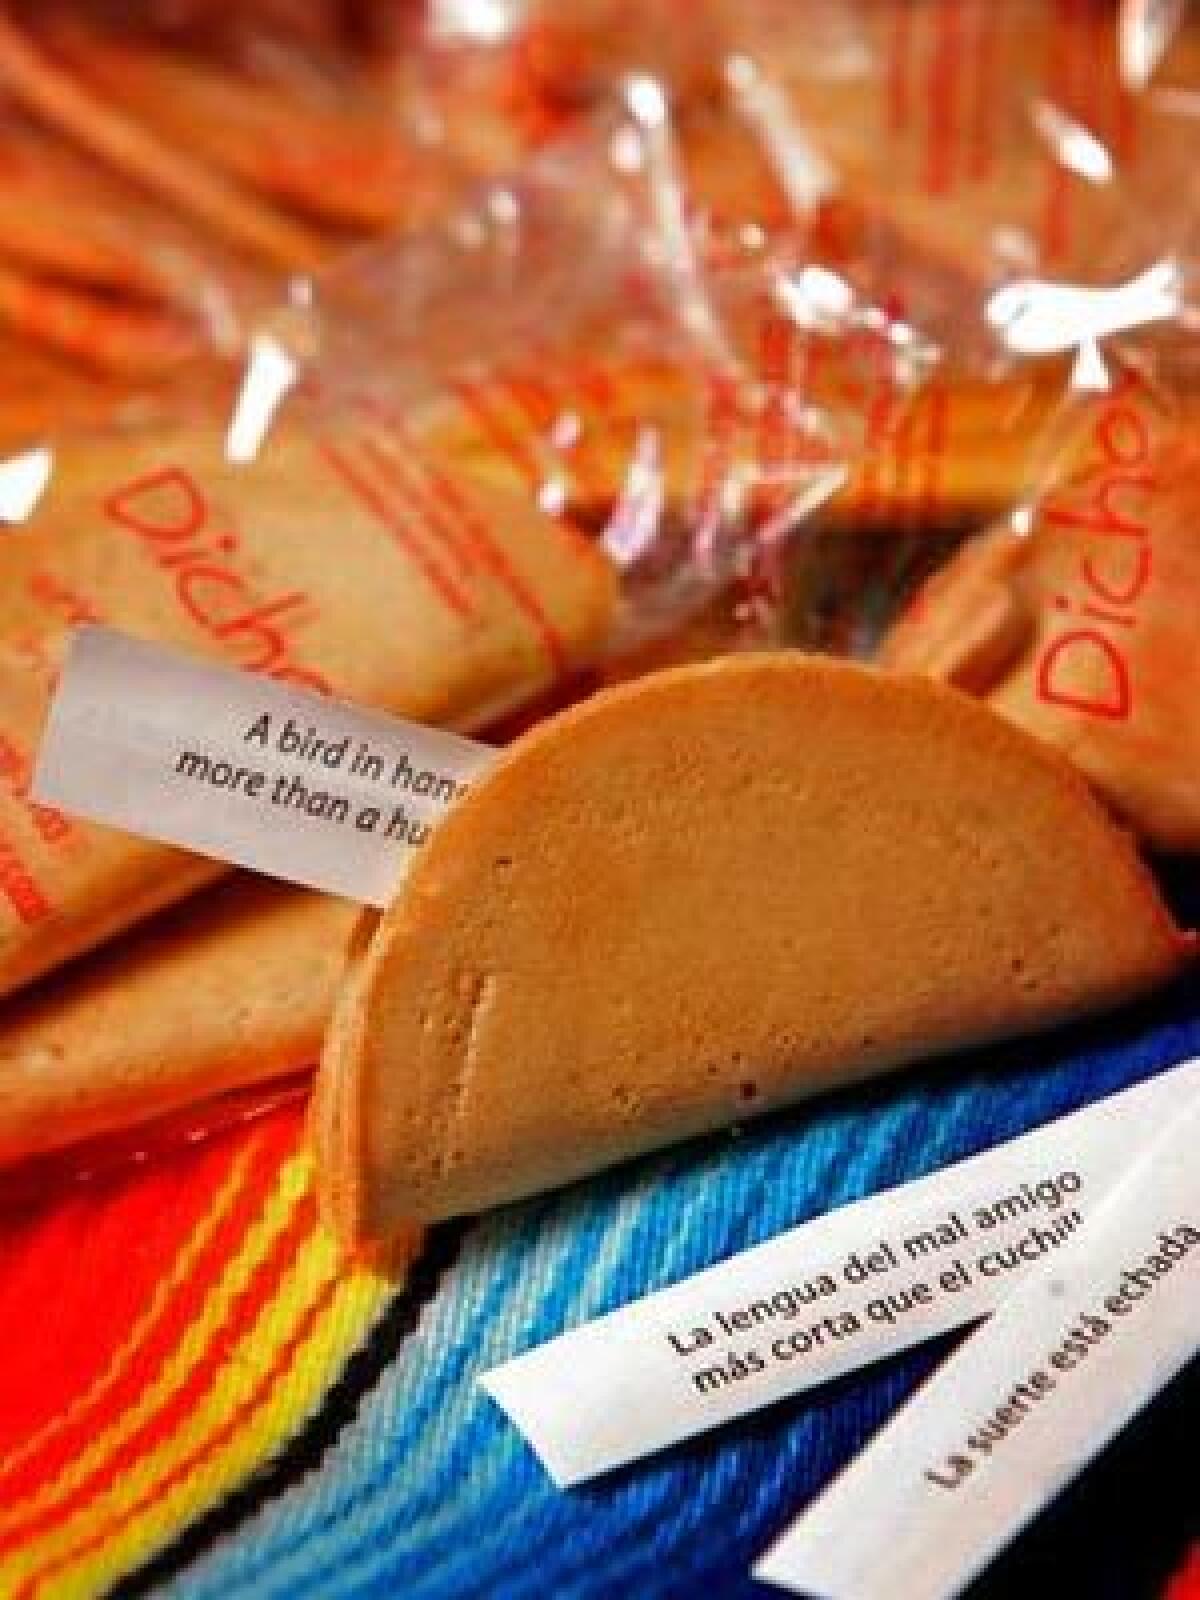 NEW: Dichos are an Mexican-American version of Chinese fortune cookies.